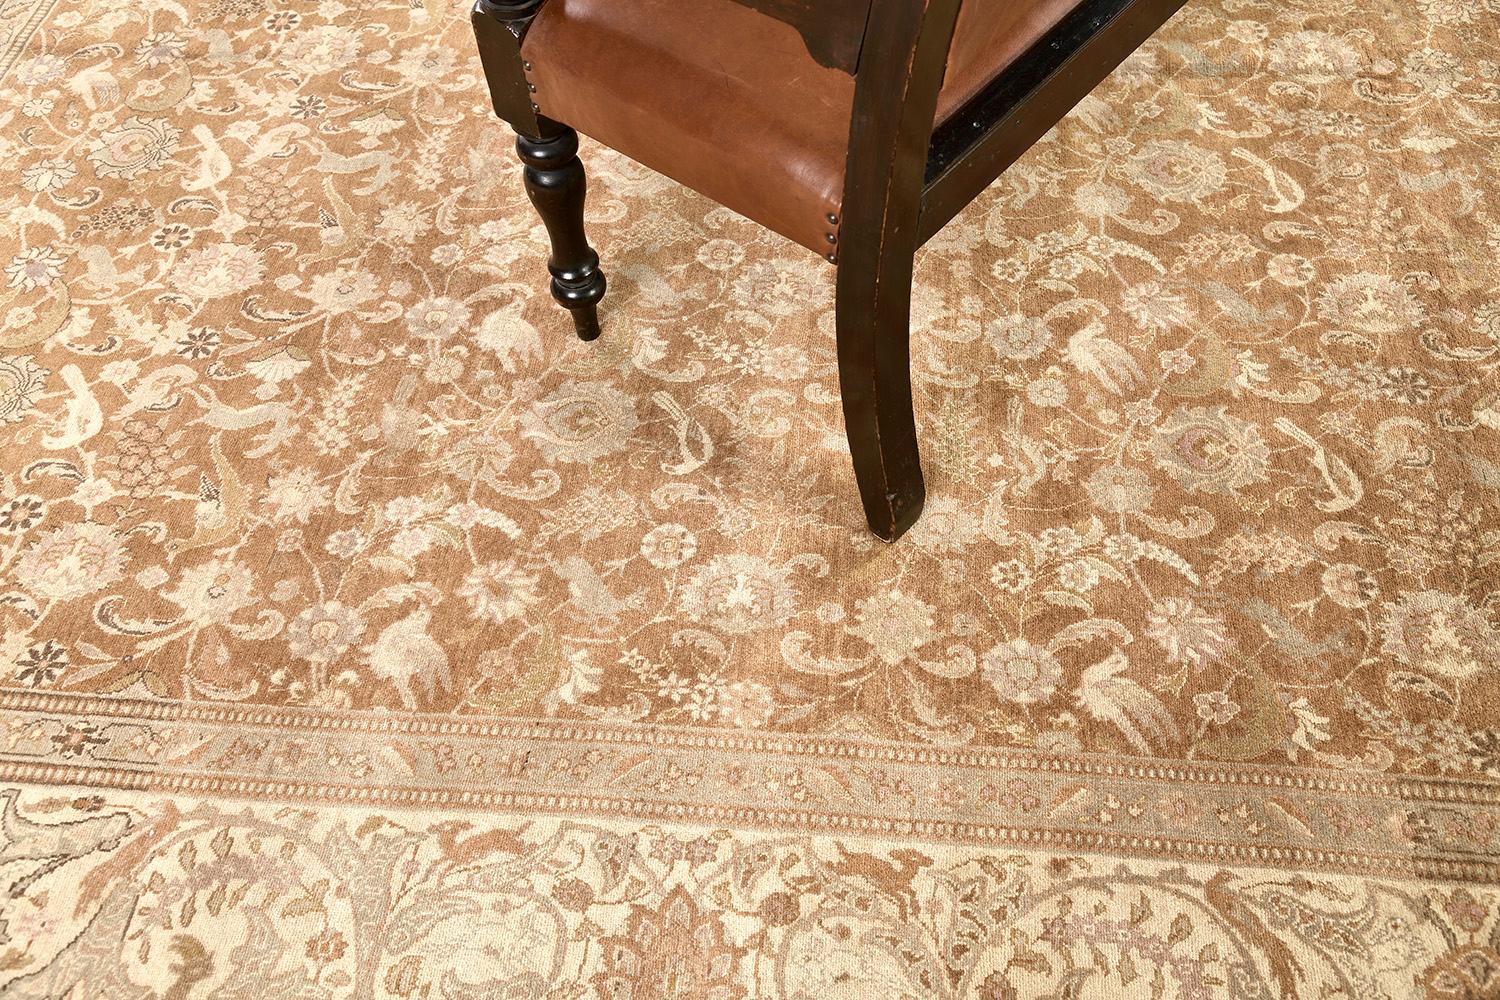 True to the best antique Persian Tabriz rugs, this beautiful Persian rug displays an incredible amount of detail using a relatively limited color palette. Several beige and brown colors dominate the masterpiece’s surface, standing out against cream